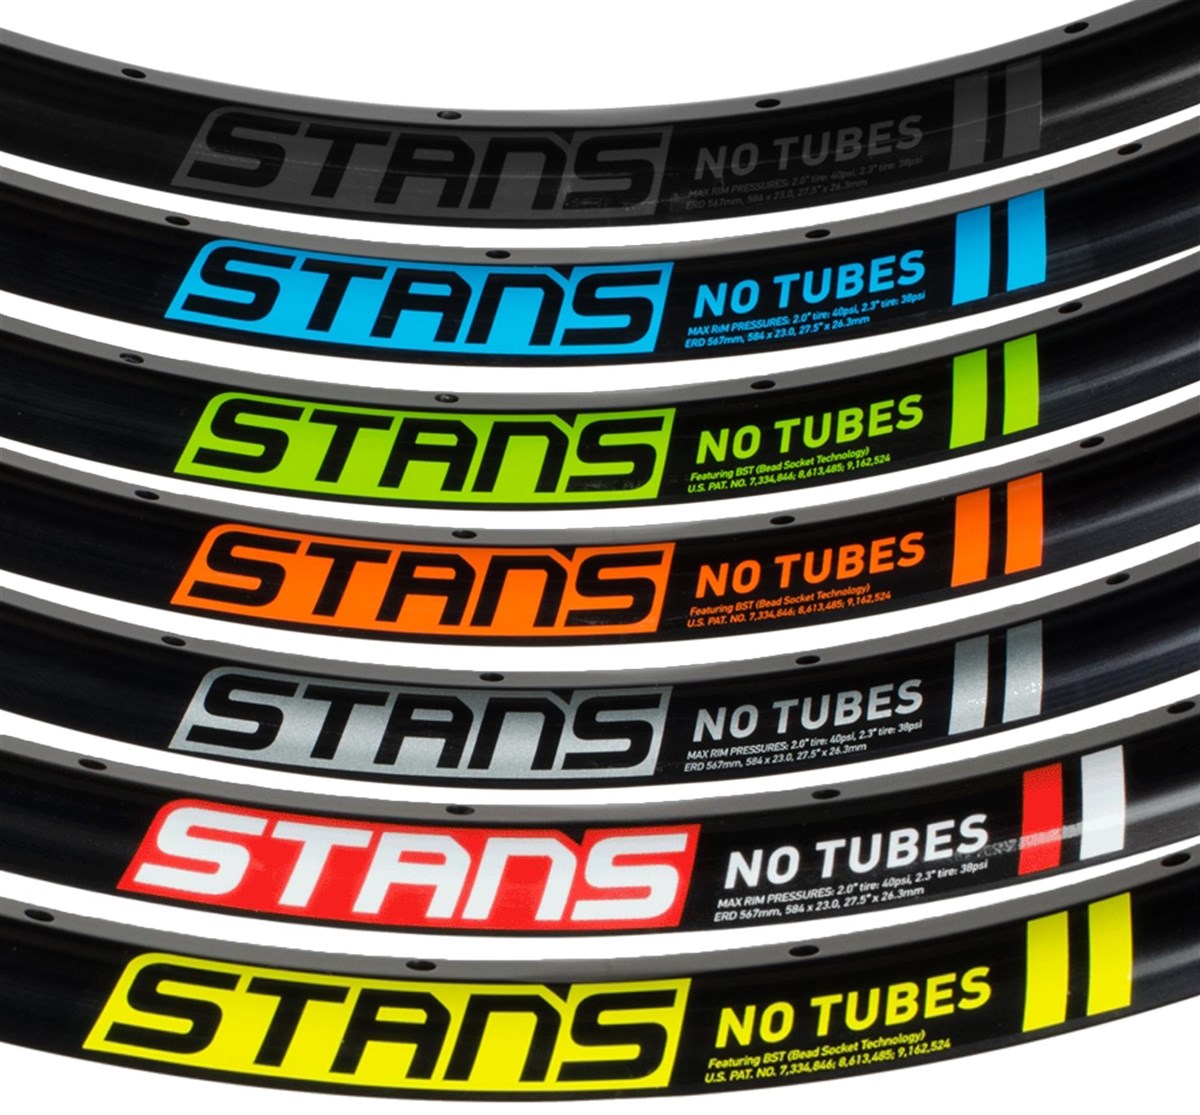 Stans NoTubes Flow MK3 Decals product image